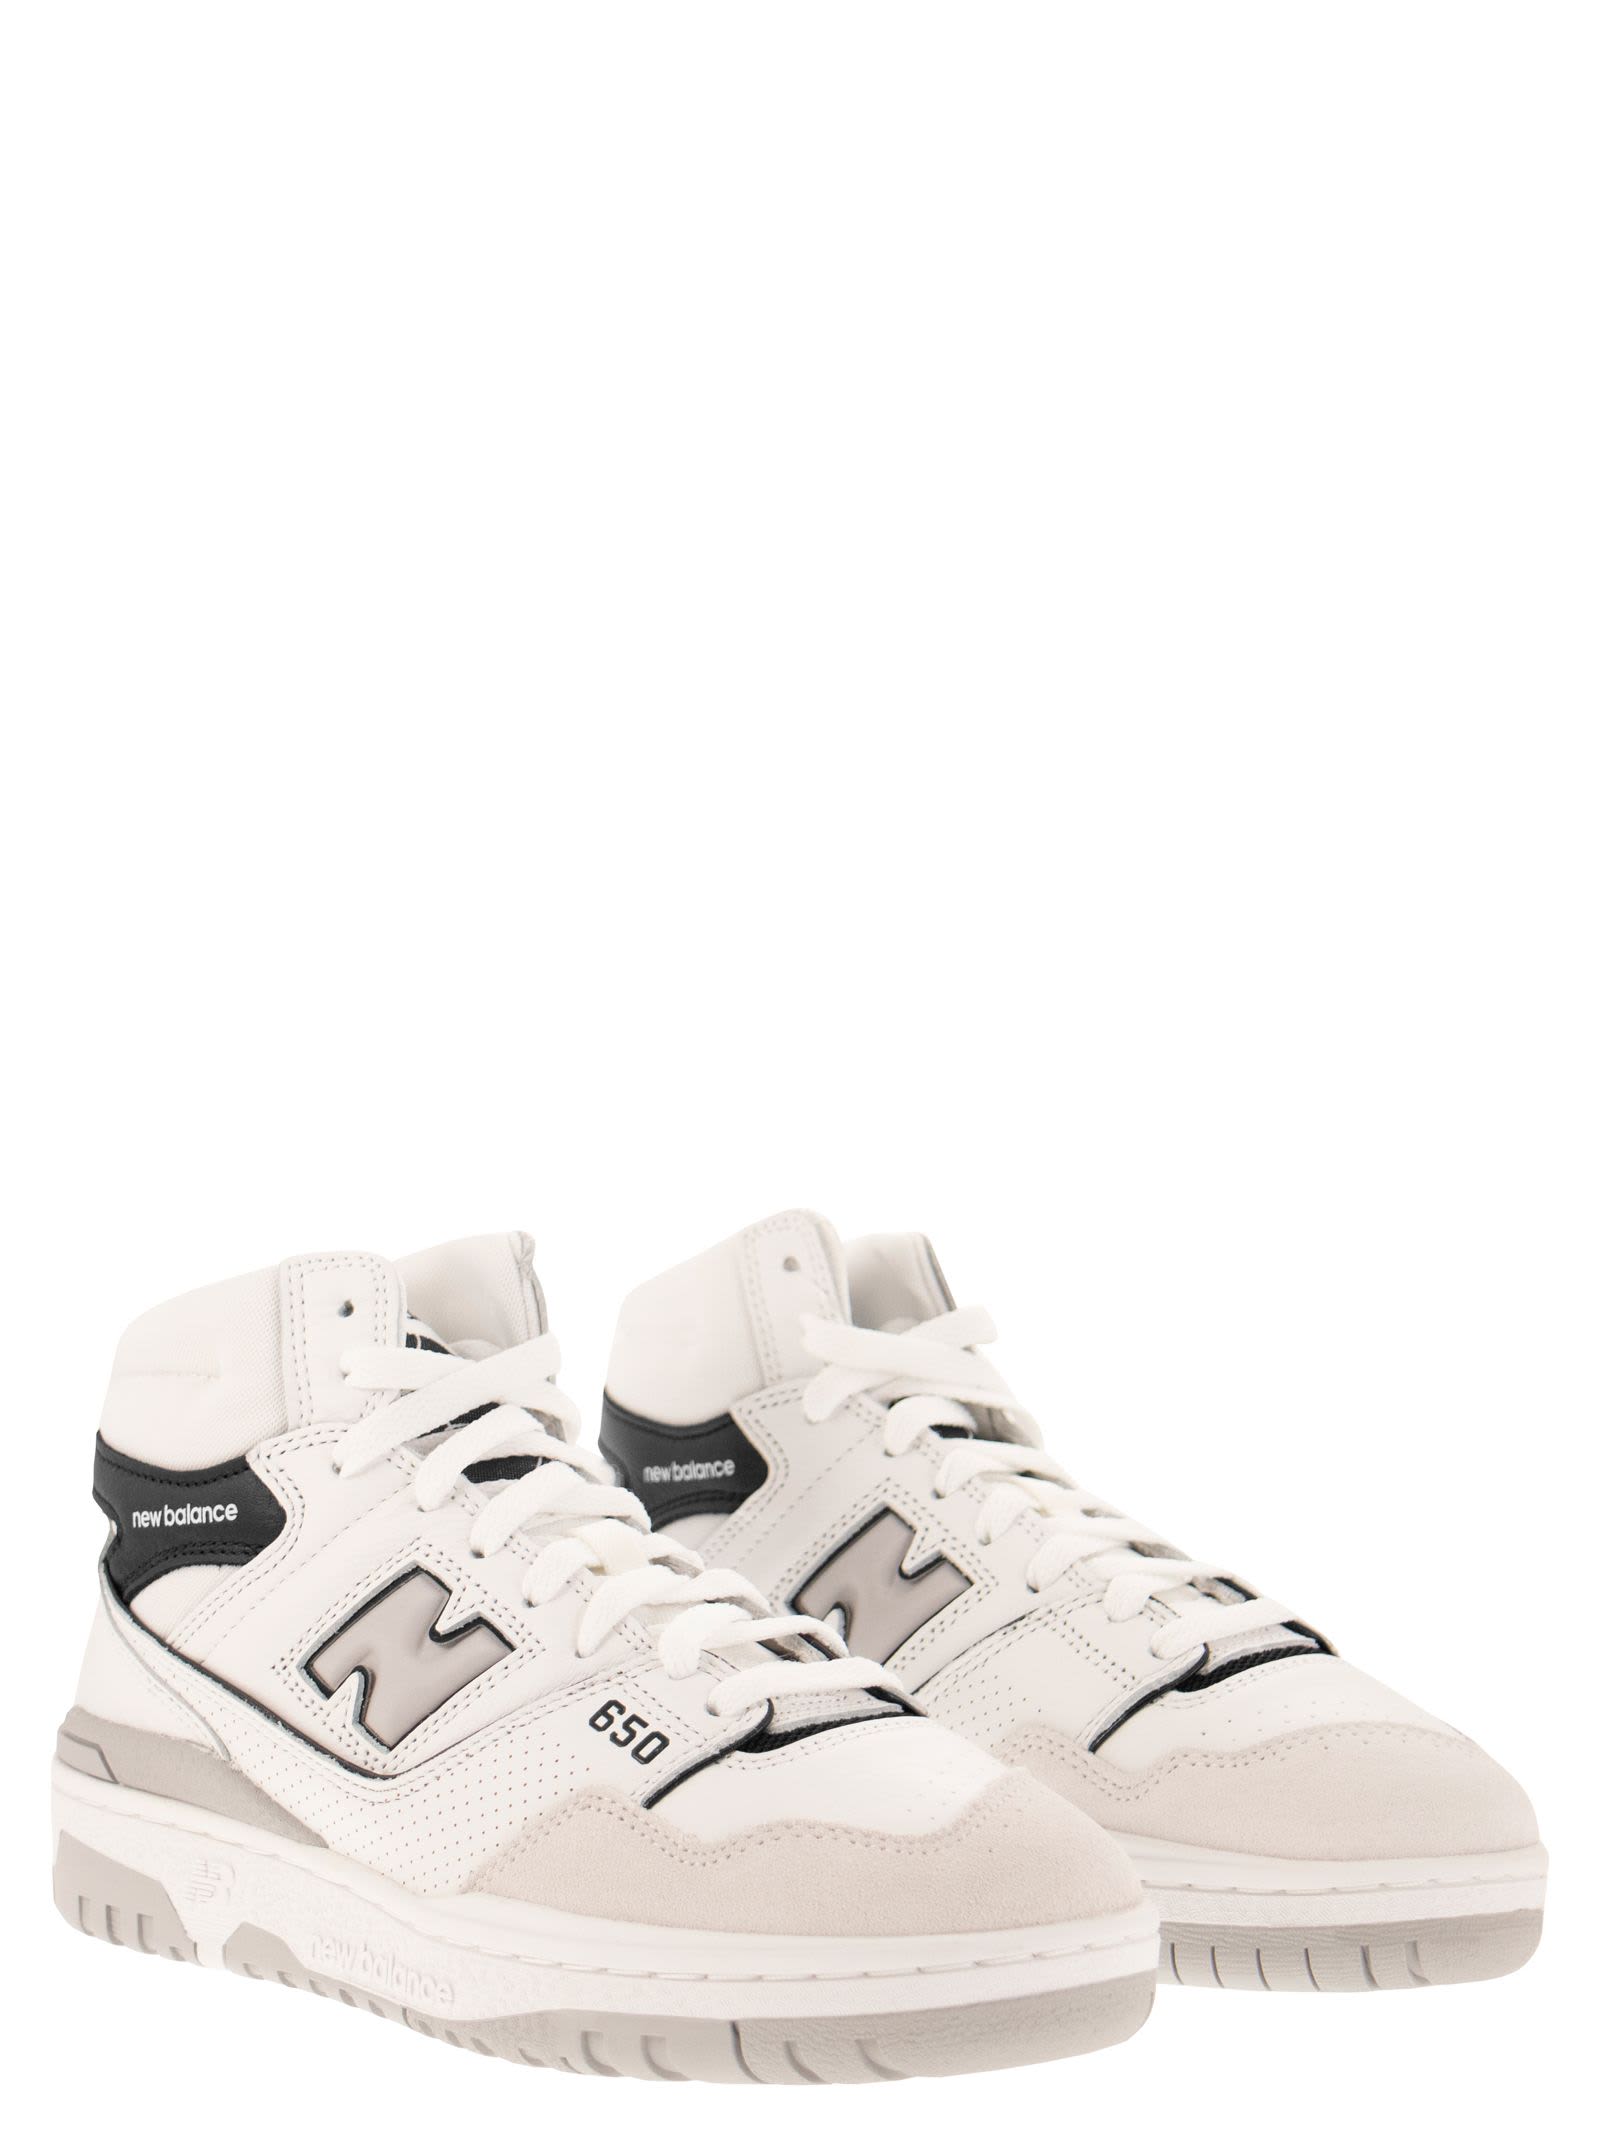 Shop New Balance Bb650 - Sneakers In White